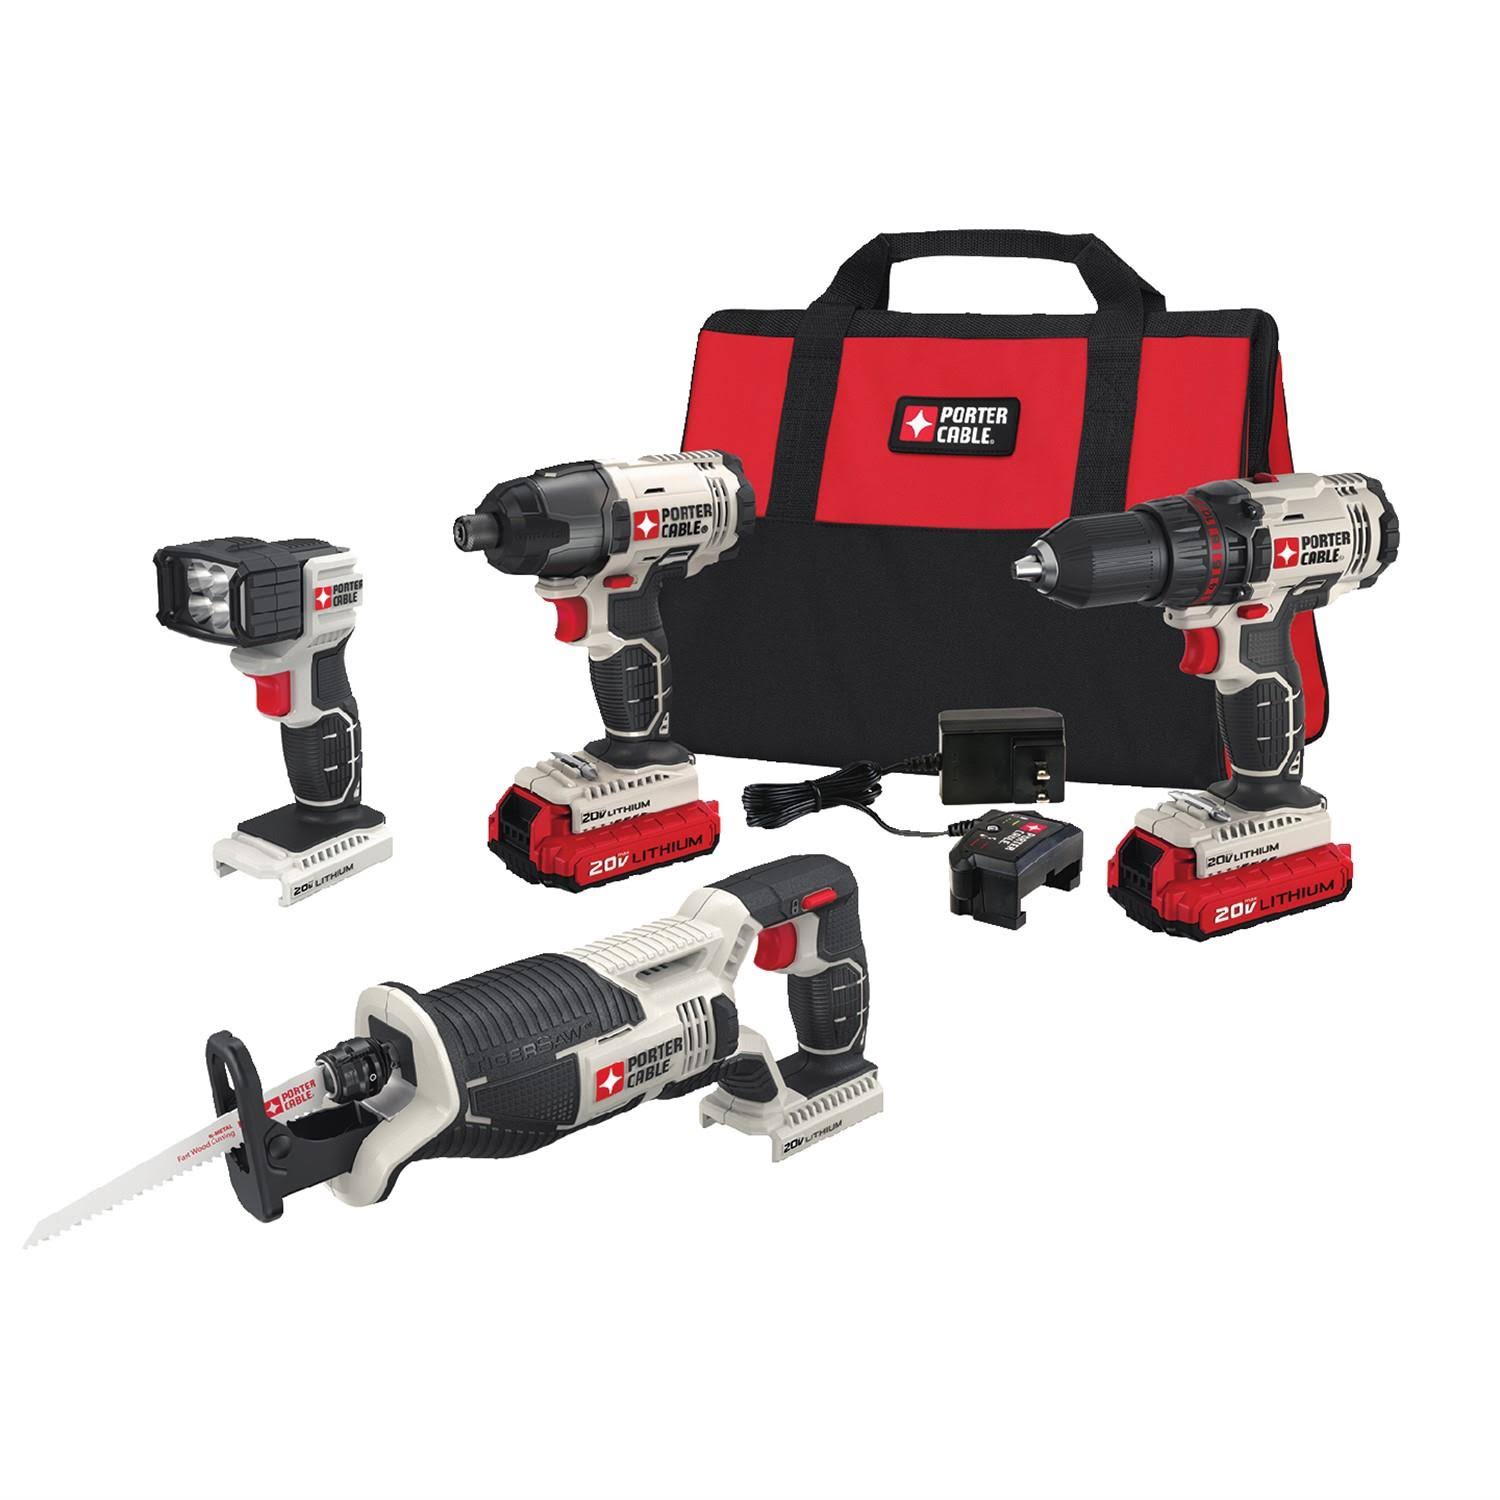 Porter Cable Max Lithium Ion Cordless Combo Kit - 4-tool, 20v